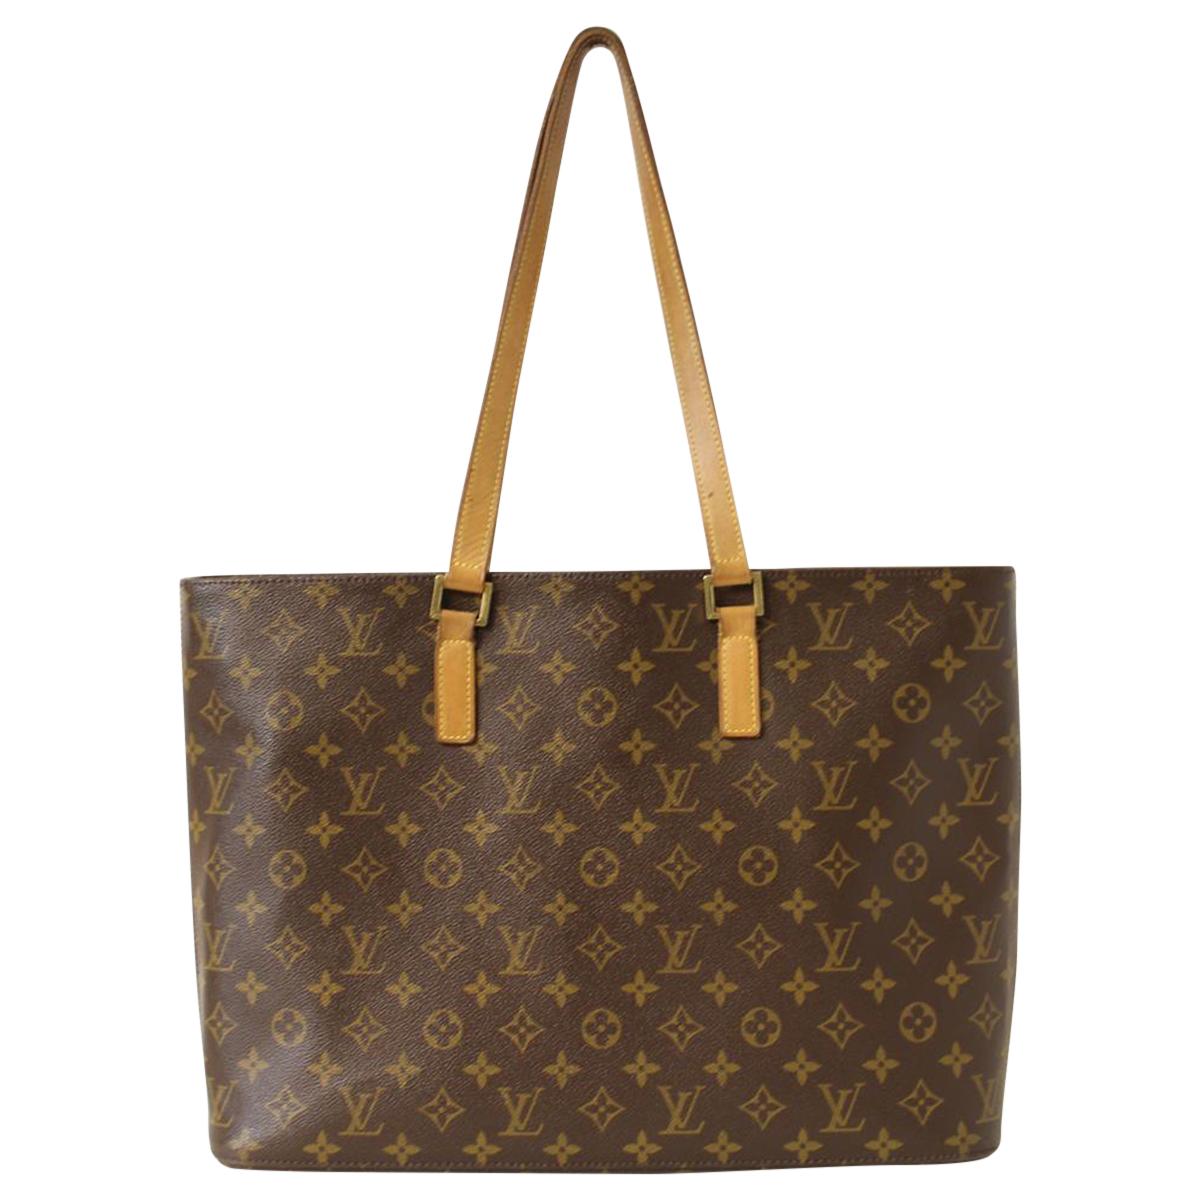 Vintage LV bag
Vintage
Monogram canvas
Brown color
Beige vacchetta double handles with little dischromias
Internal alcantara lining
One internal pocket with zip closure
Other four pockets
Cm 30x43x11 (11,81x16,92x4,33 inches)
Worldwide express